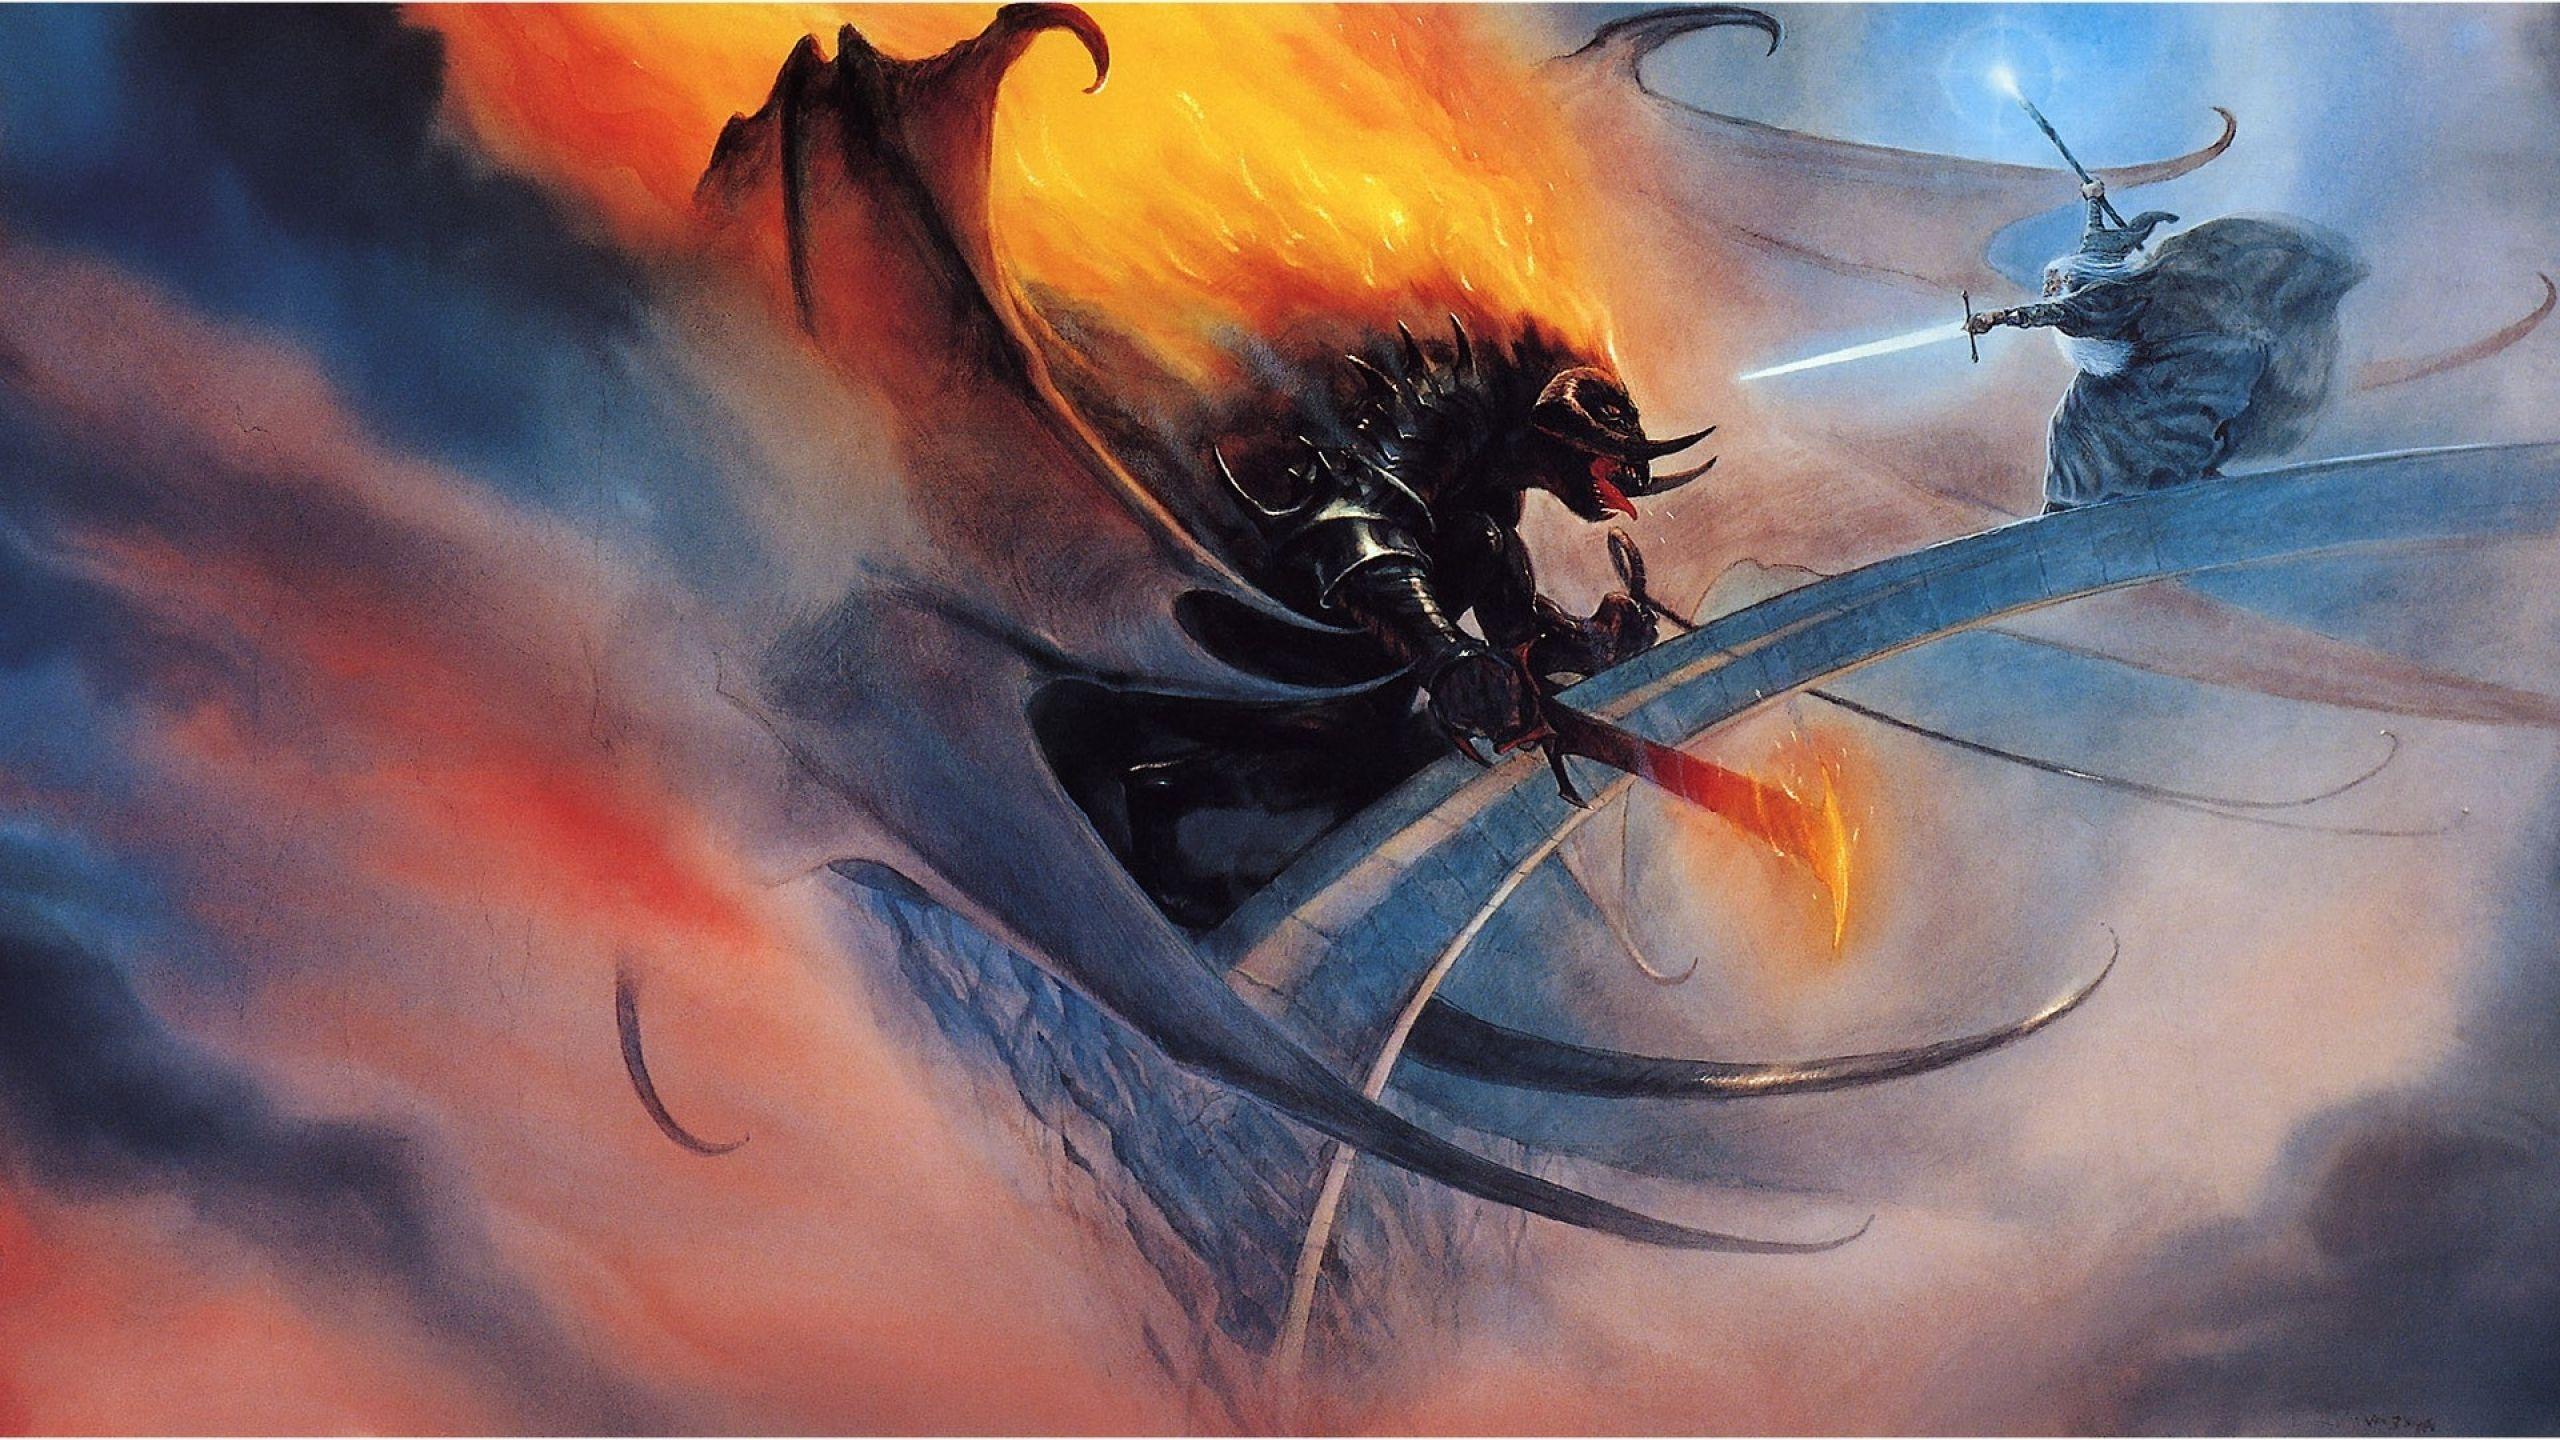 The Lord of the Rings  Balrog Wall Mural  Buy online at Europosters